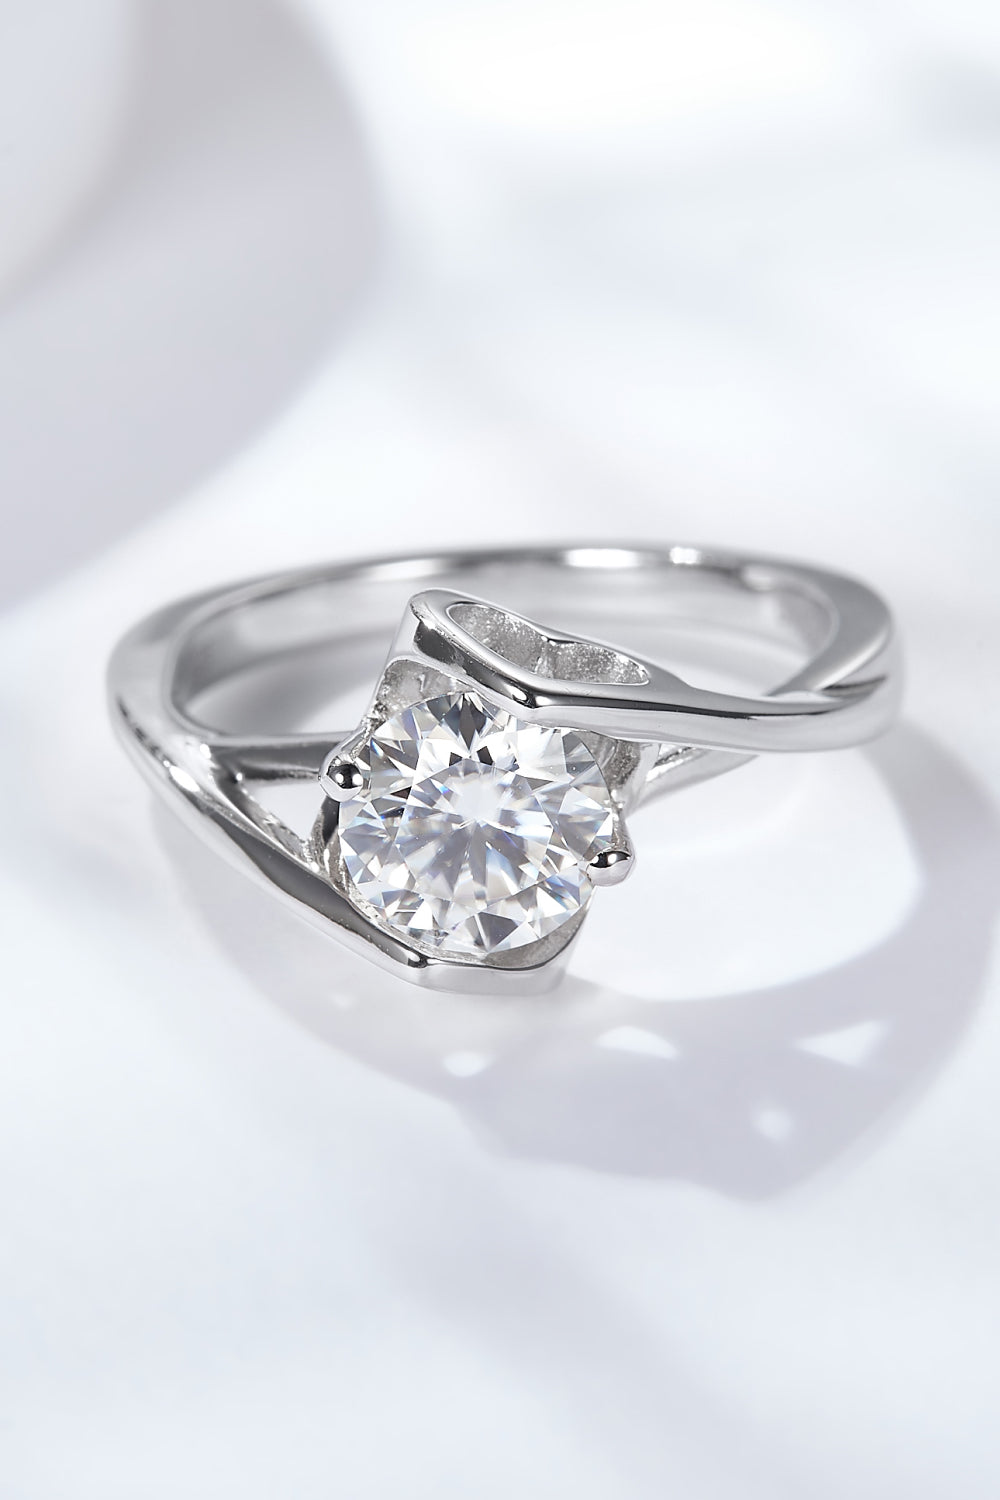 Get What You Need 1 Carat Round Brilliant Cut Moissanite Ring - Sparkala